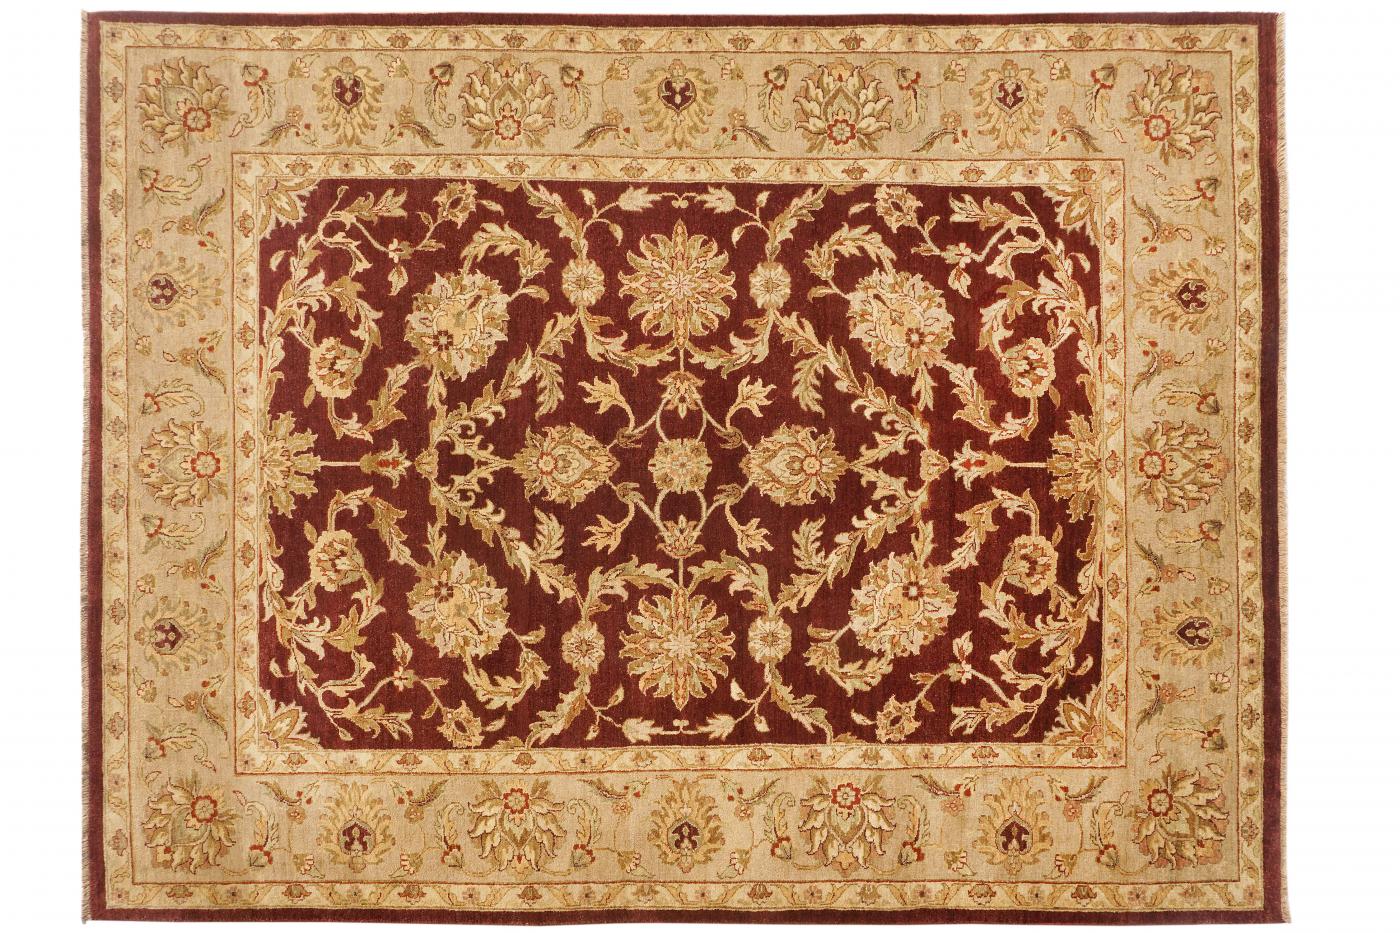 Hand Knotted Carpets 7-42 J-7A Burgundy-Camel 8x10